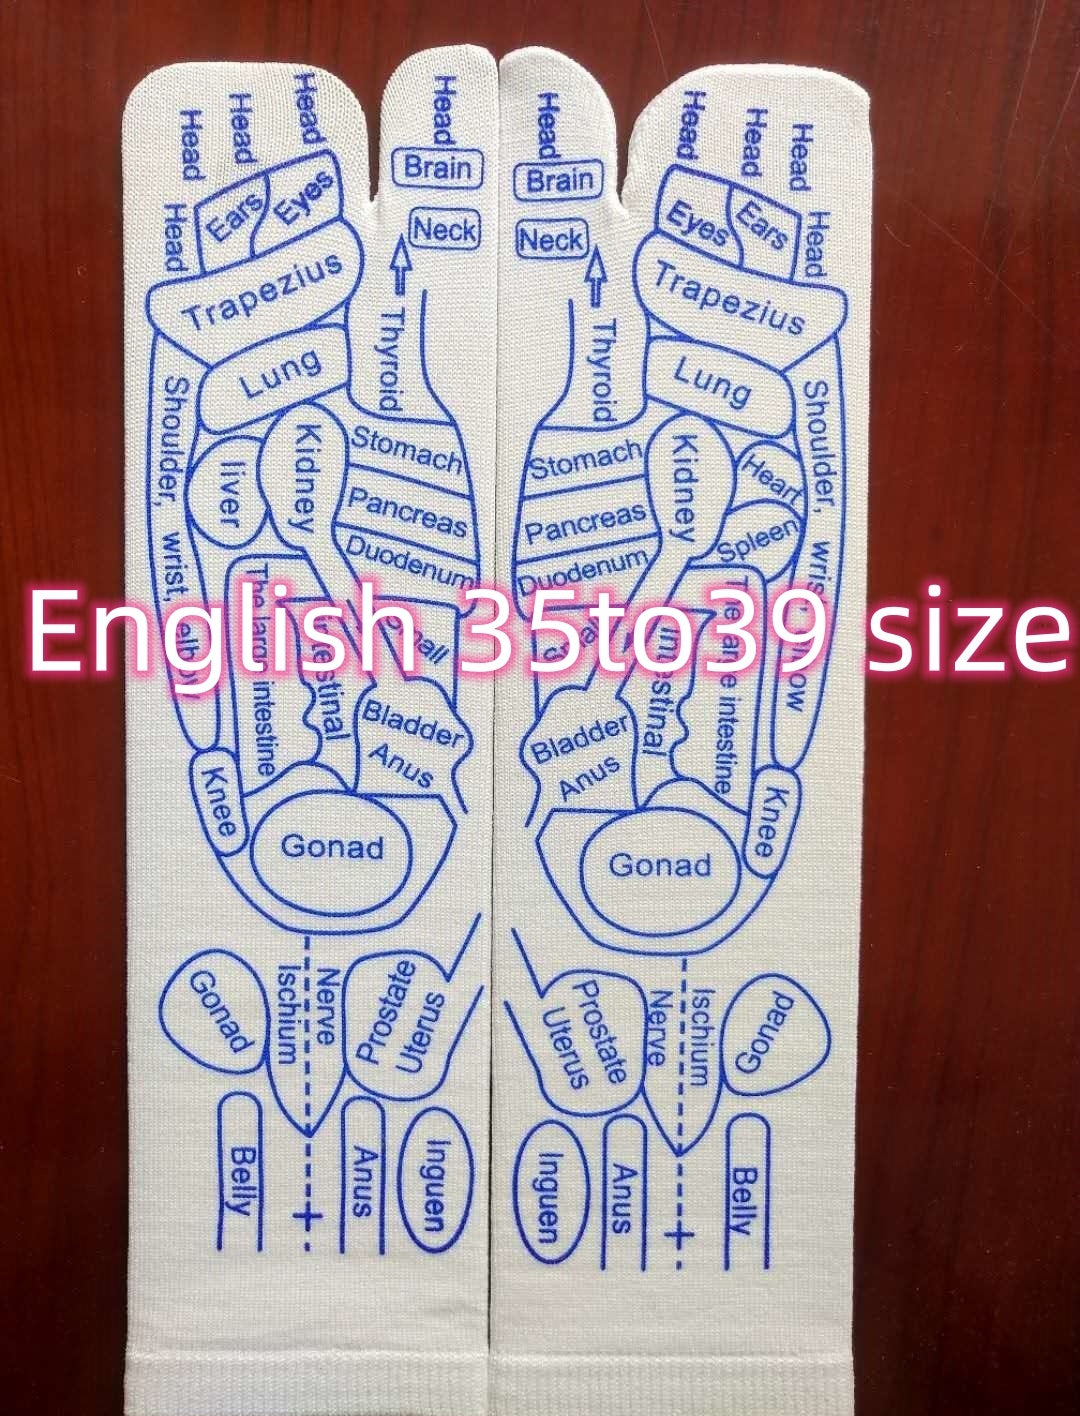 English 35to39 size